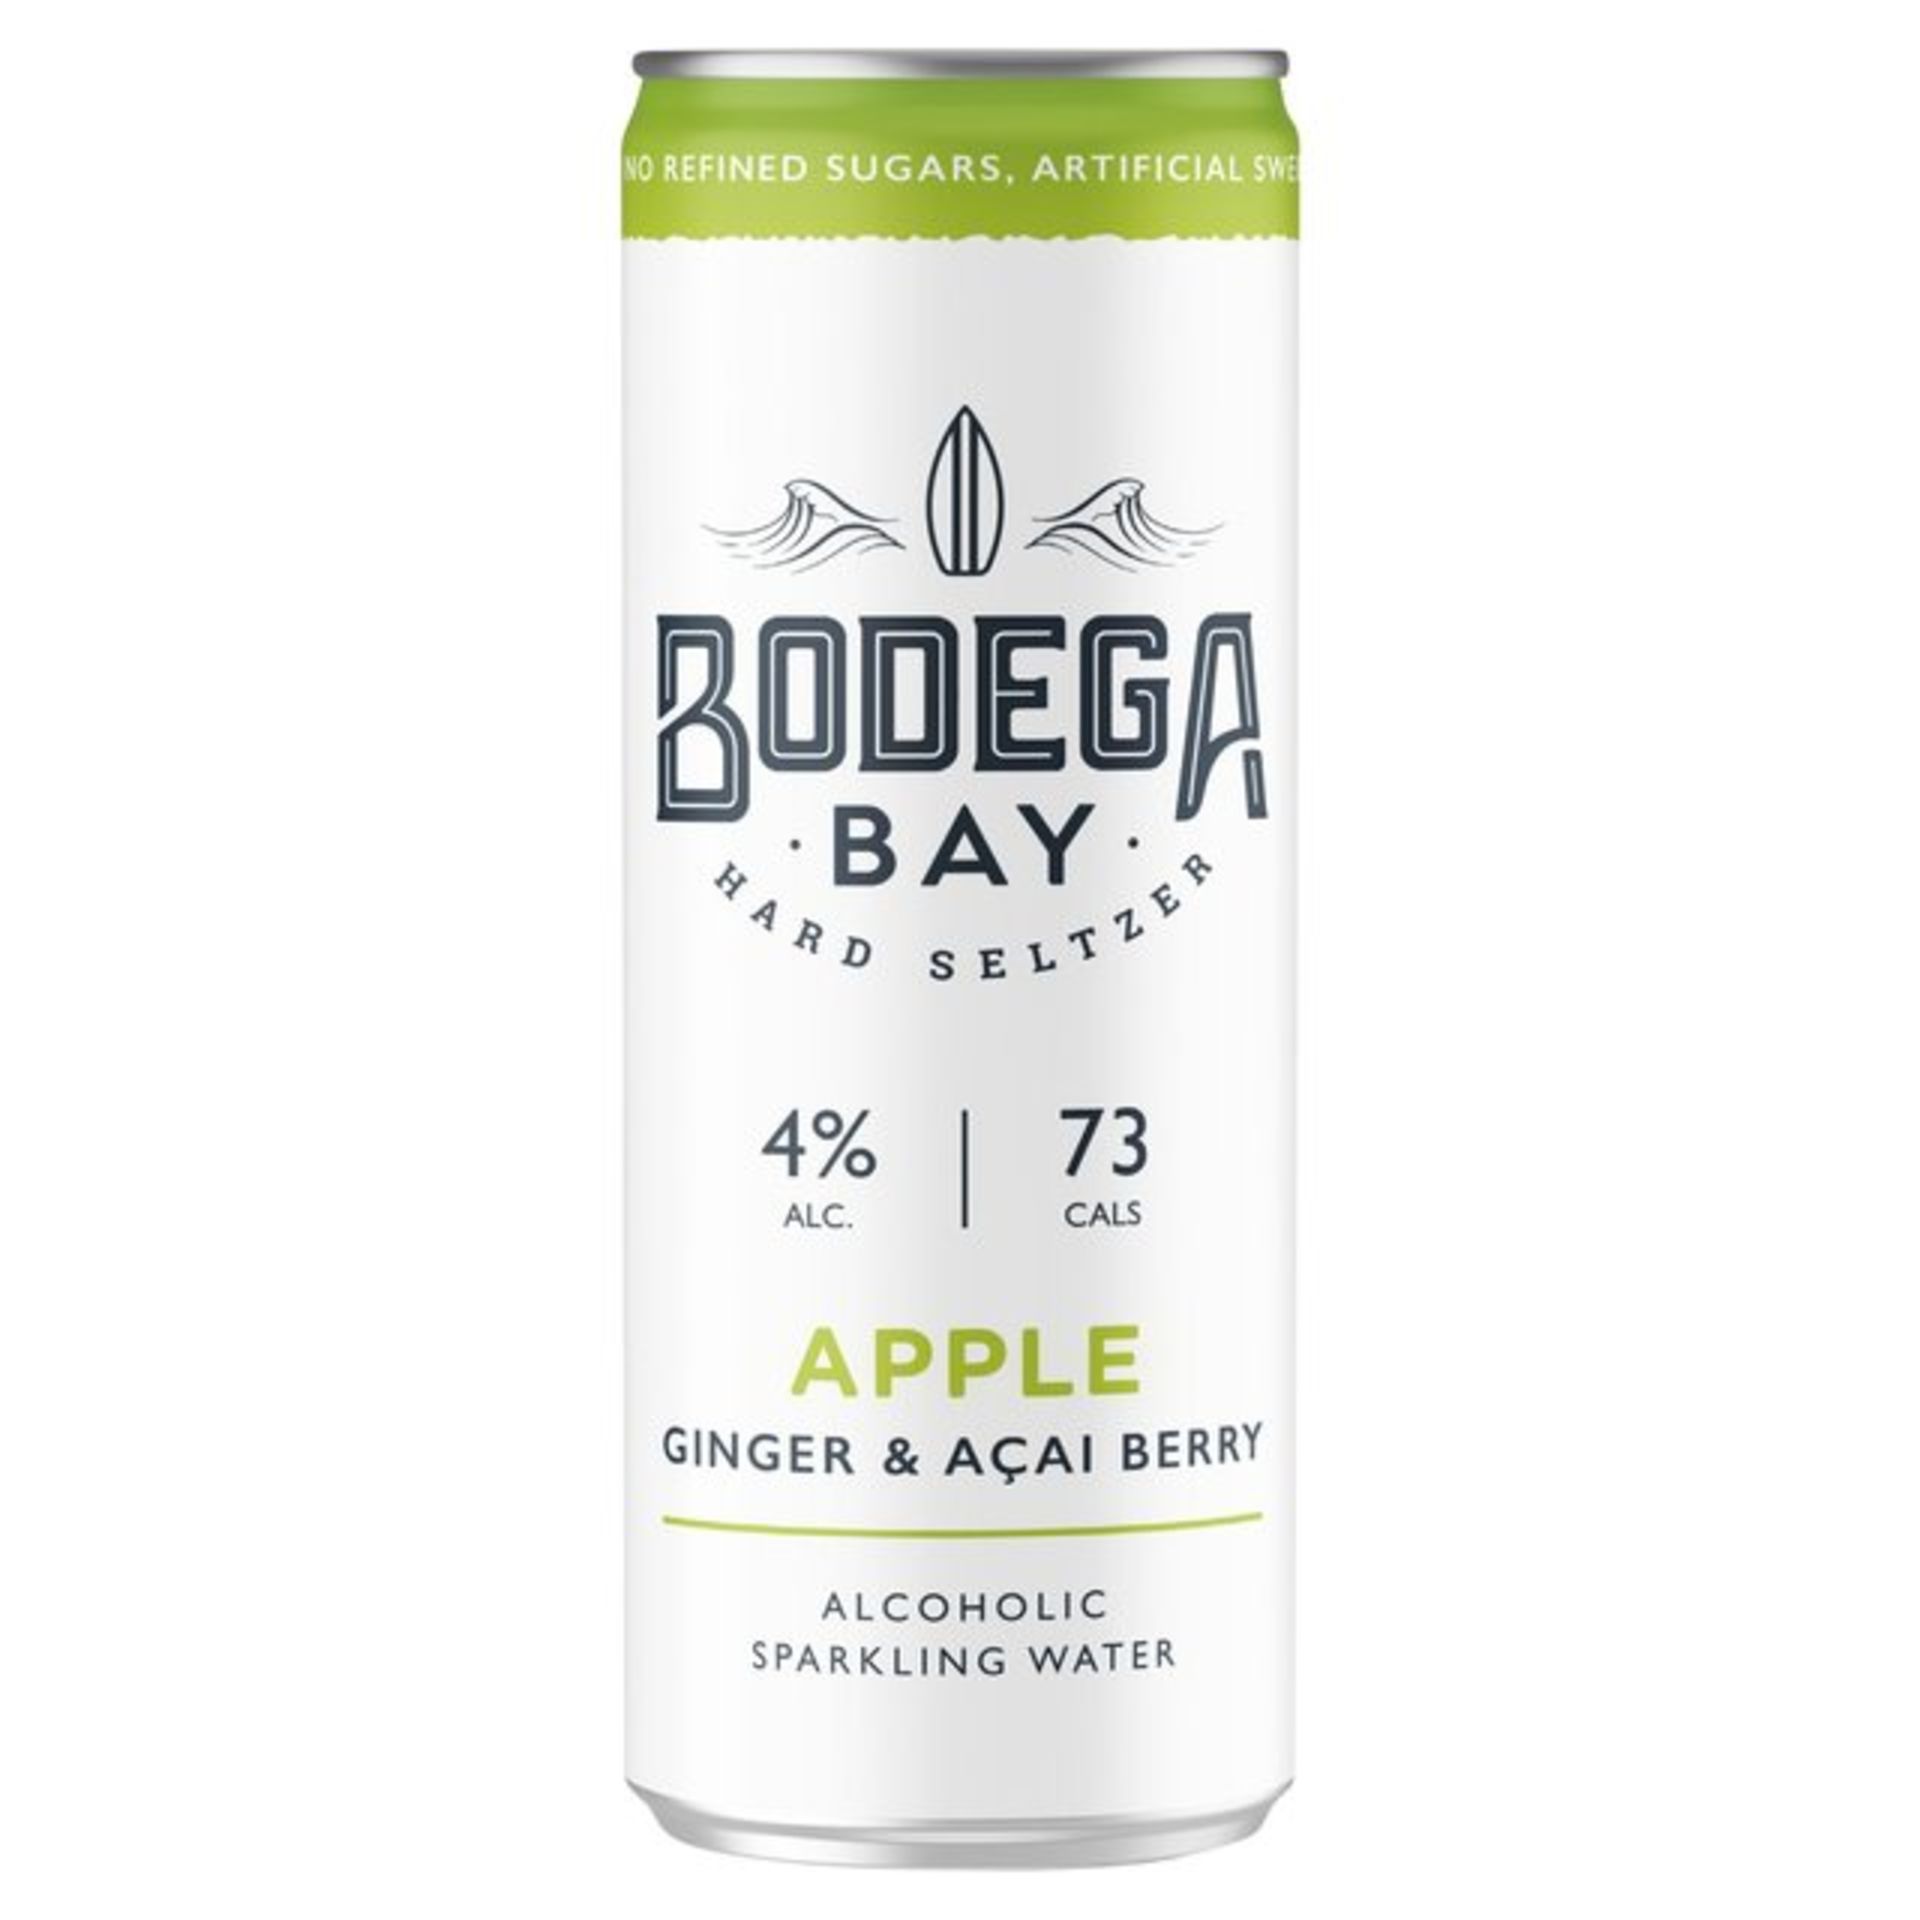 1,080 x Cans of Bodega Bay Hard Seltzer 250ml Alcoholic Sparkling Water Drinks - RESALE JOB LOT - Image 3 of 30